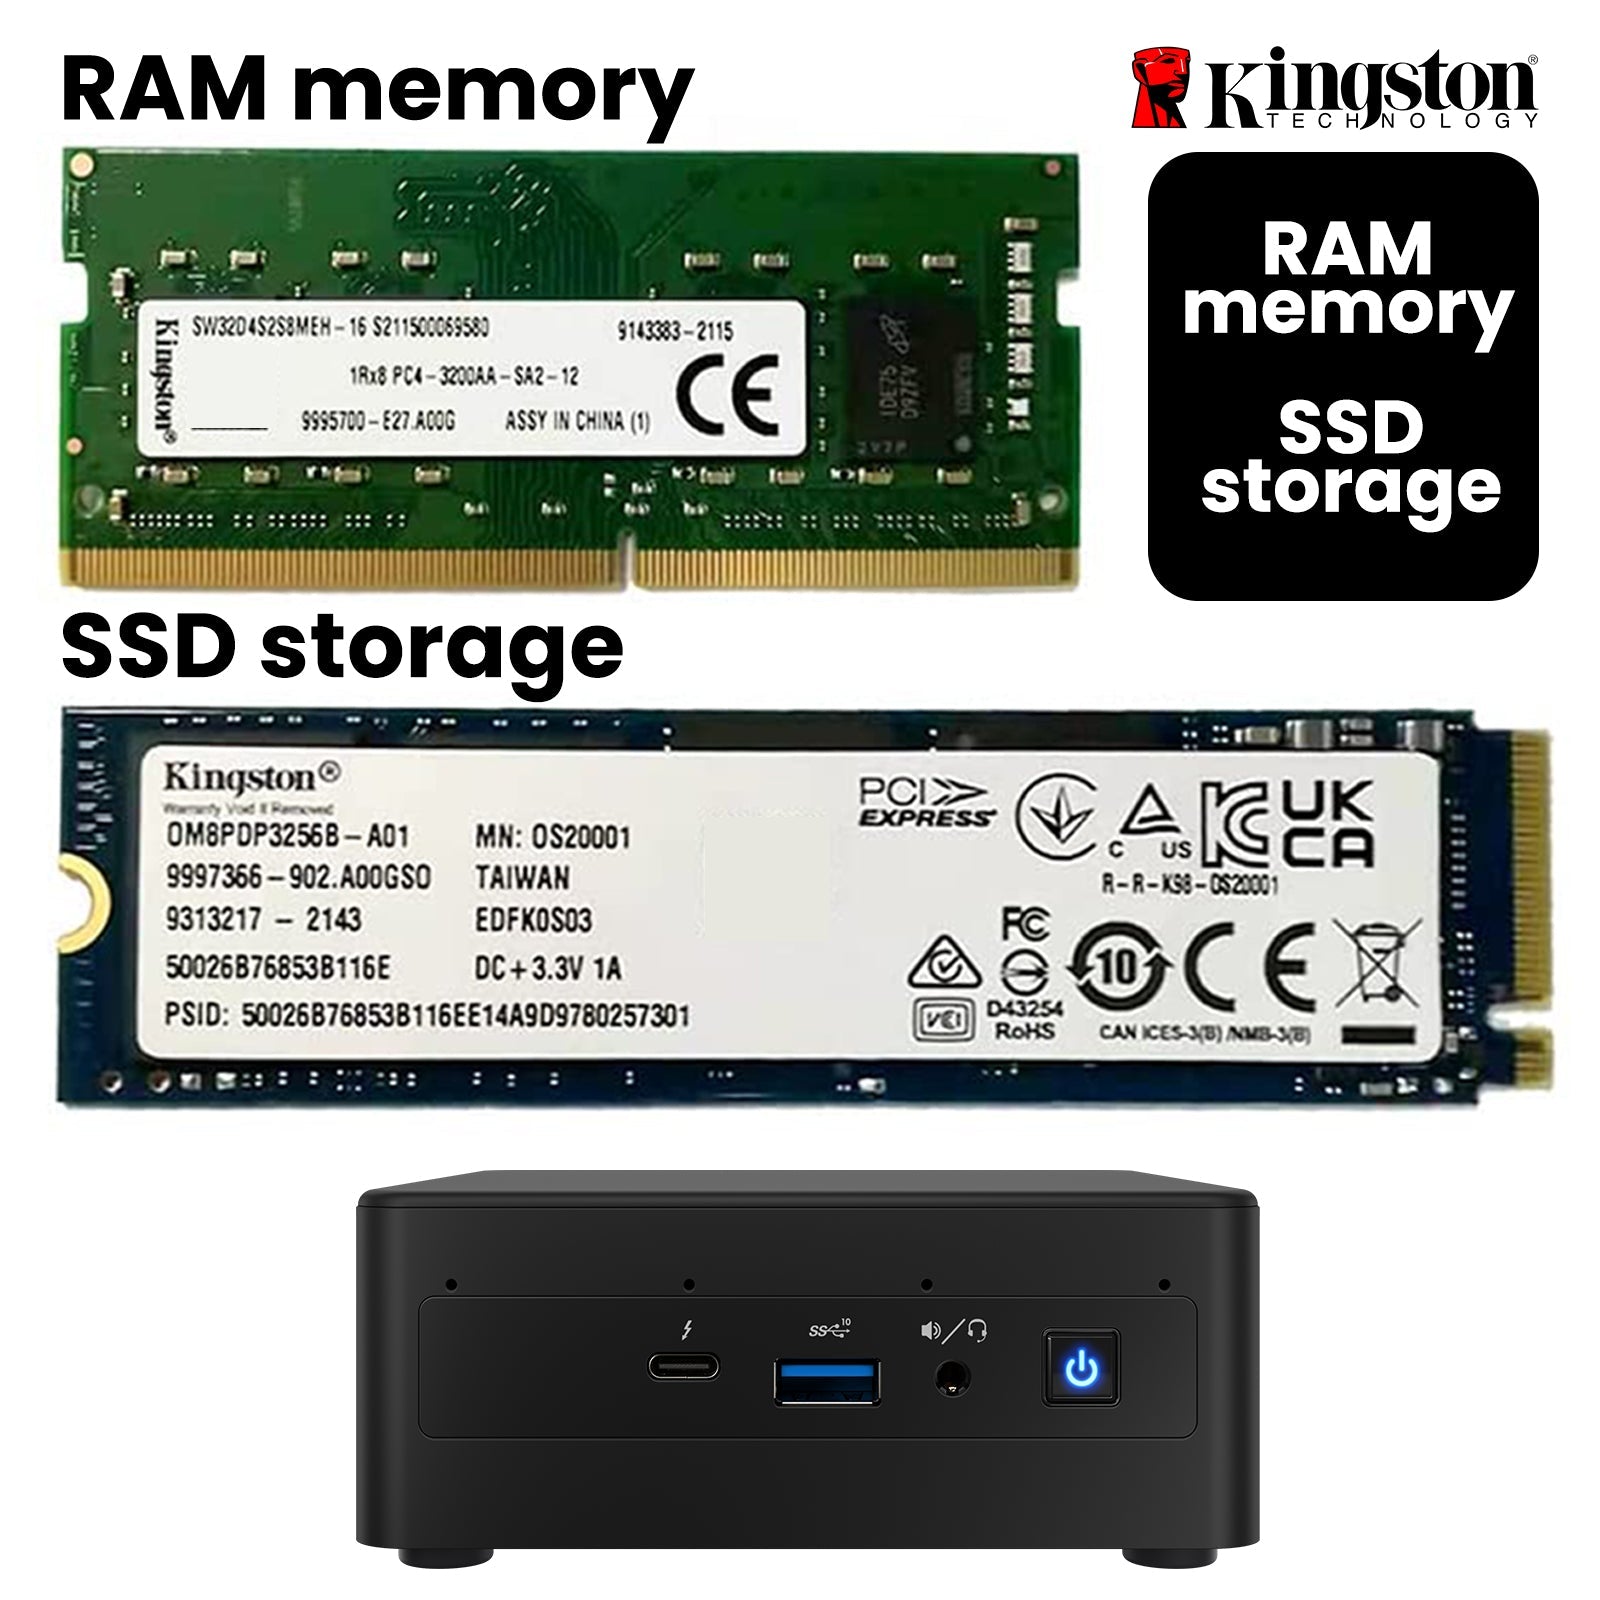 Intel NUC 11 Performance with Kingson SSD Storage and RAM Memory